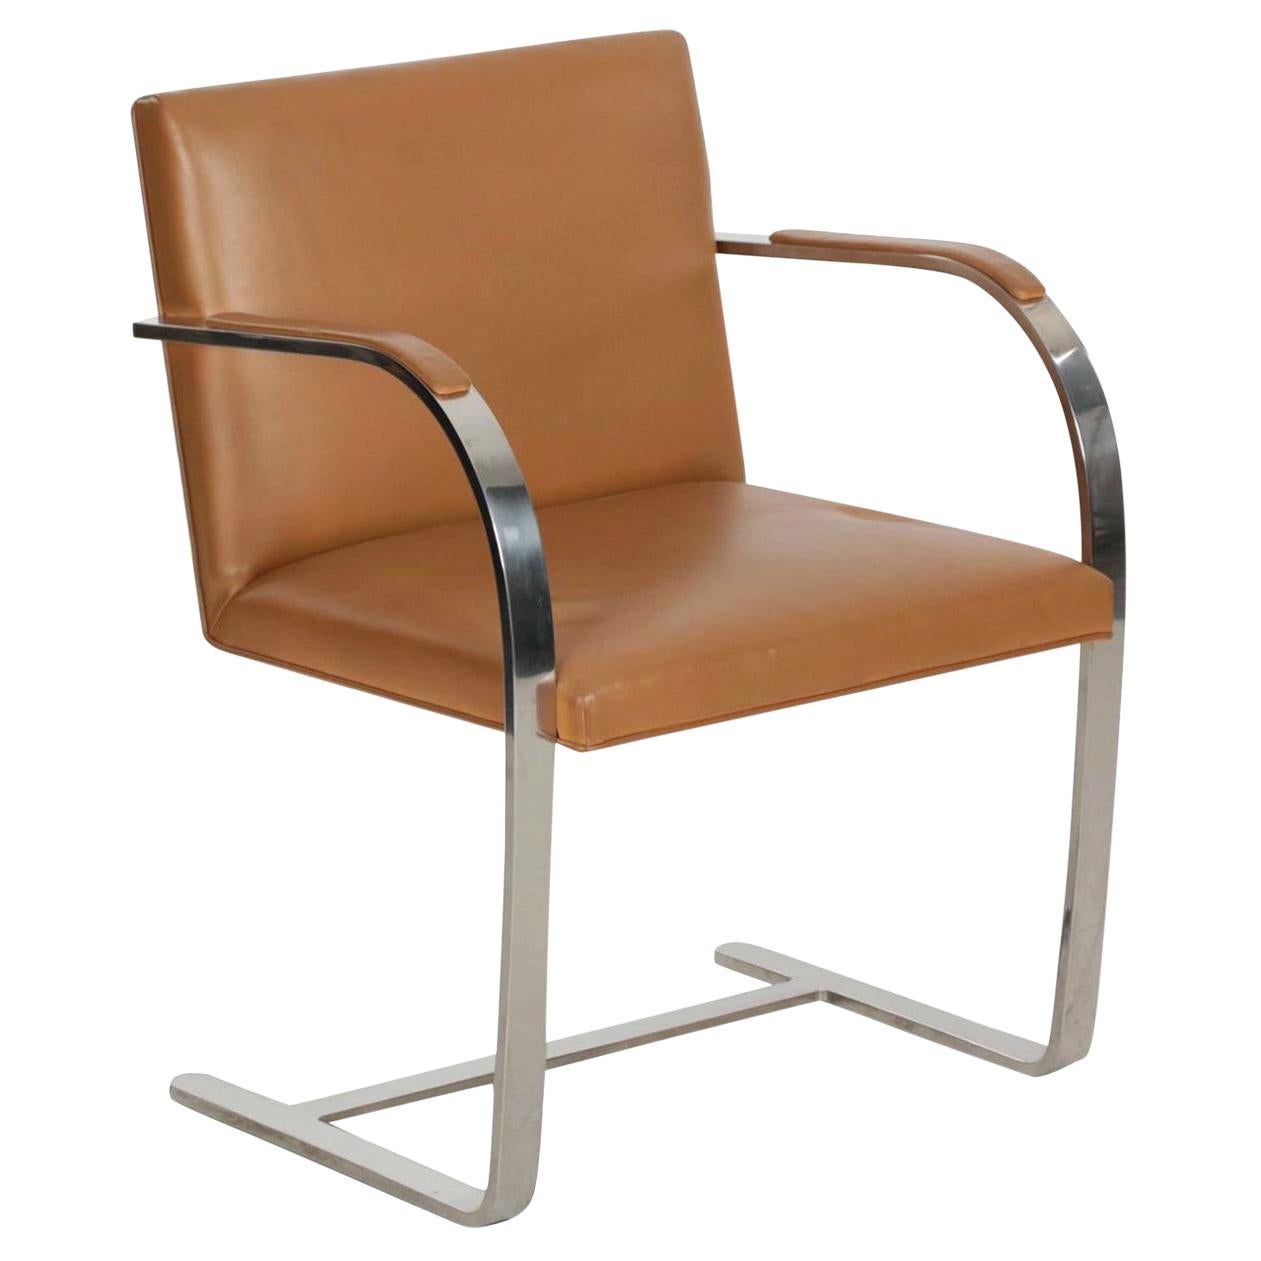 Modern Leather and Steel Brno Lounge Armchair by Mies van der Rohe for Knoll